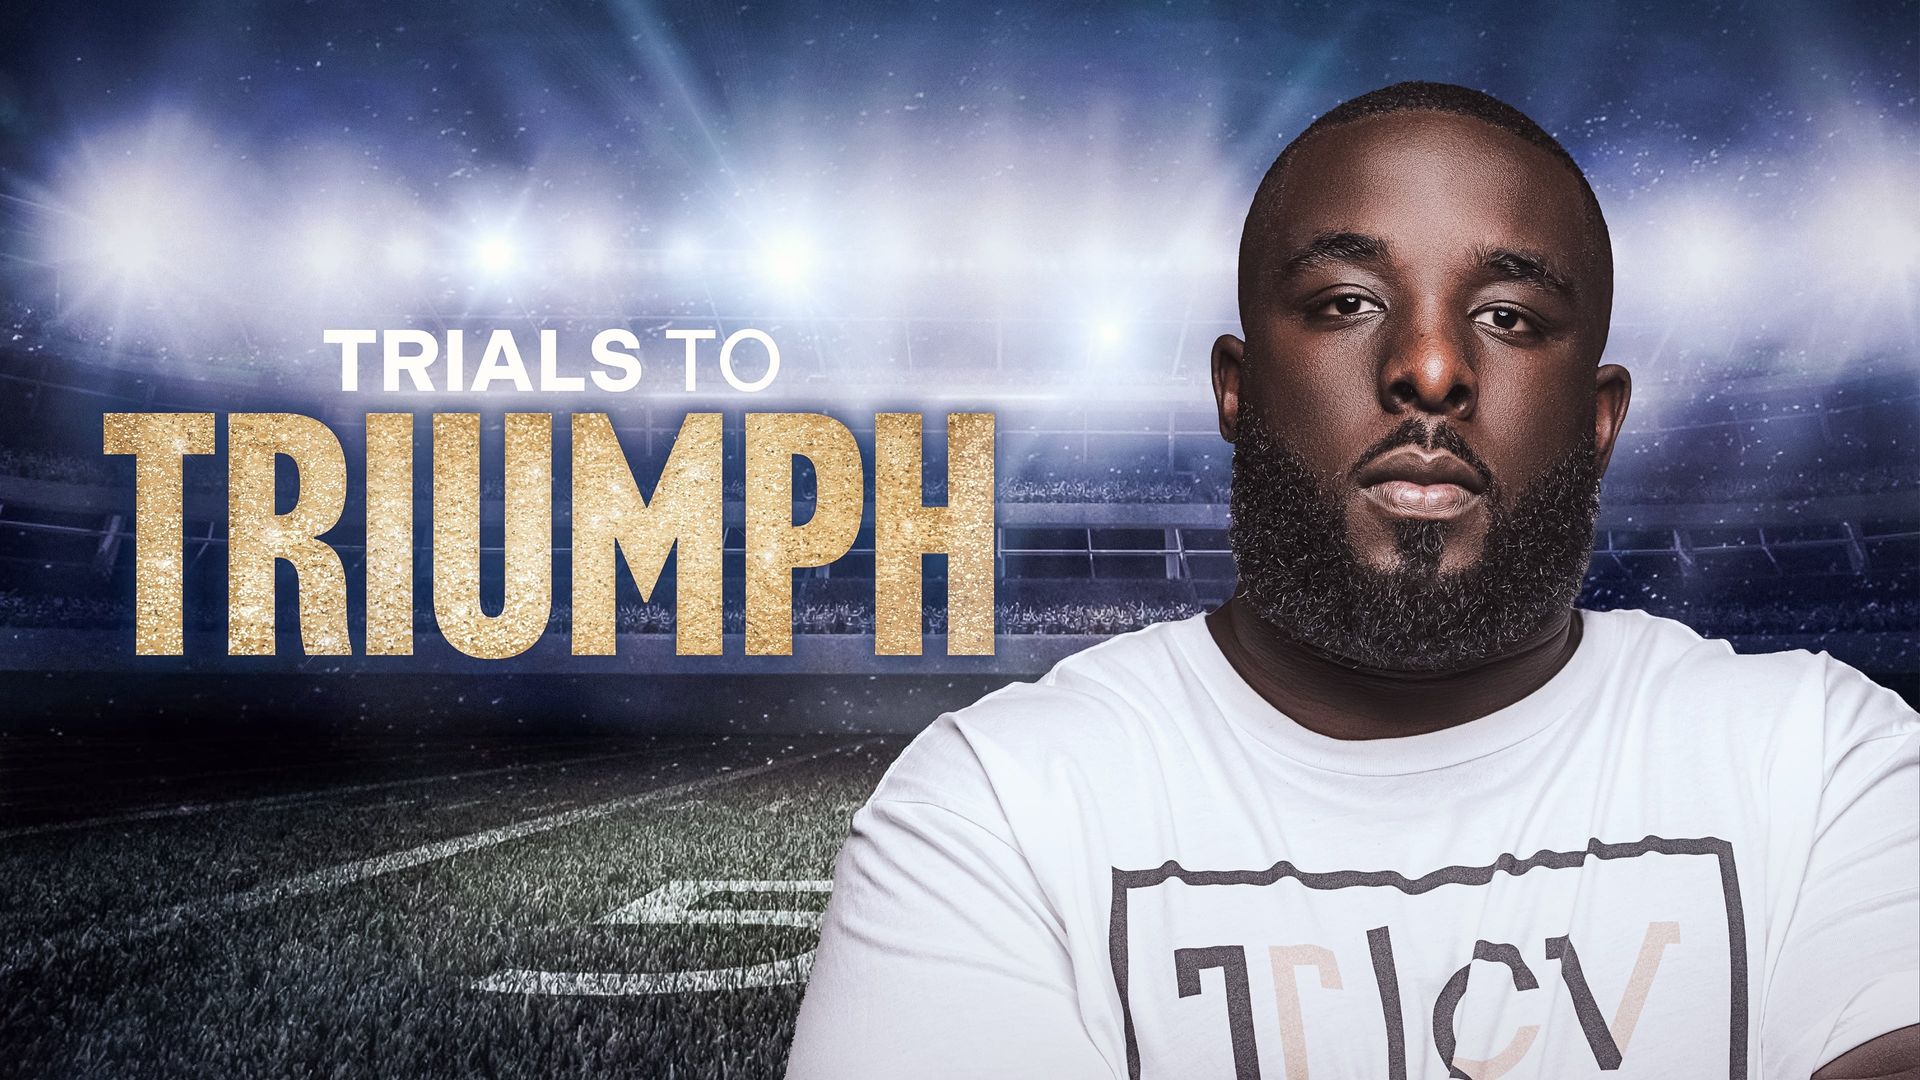 Trials to Triumph: The Documentary background